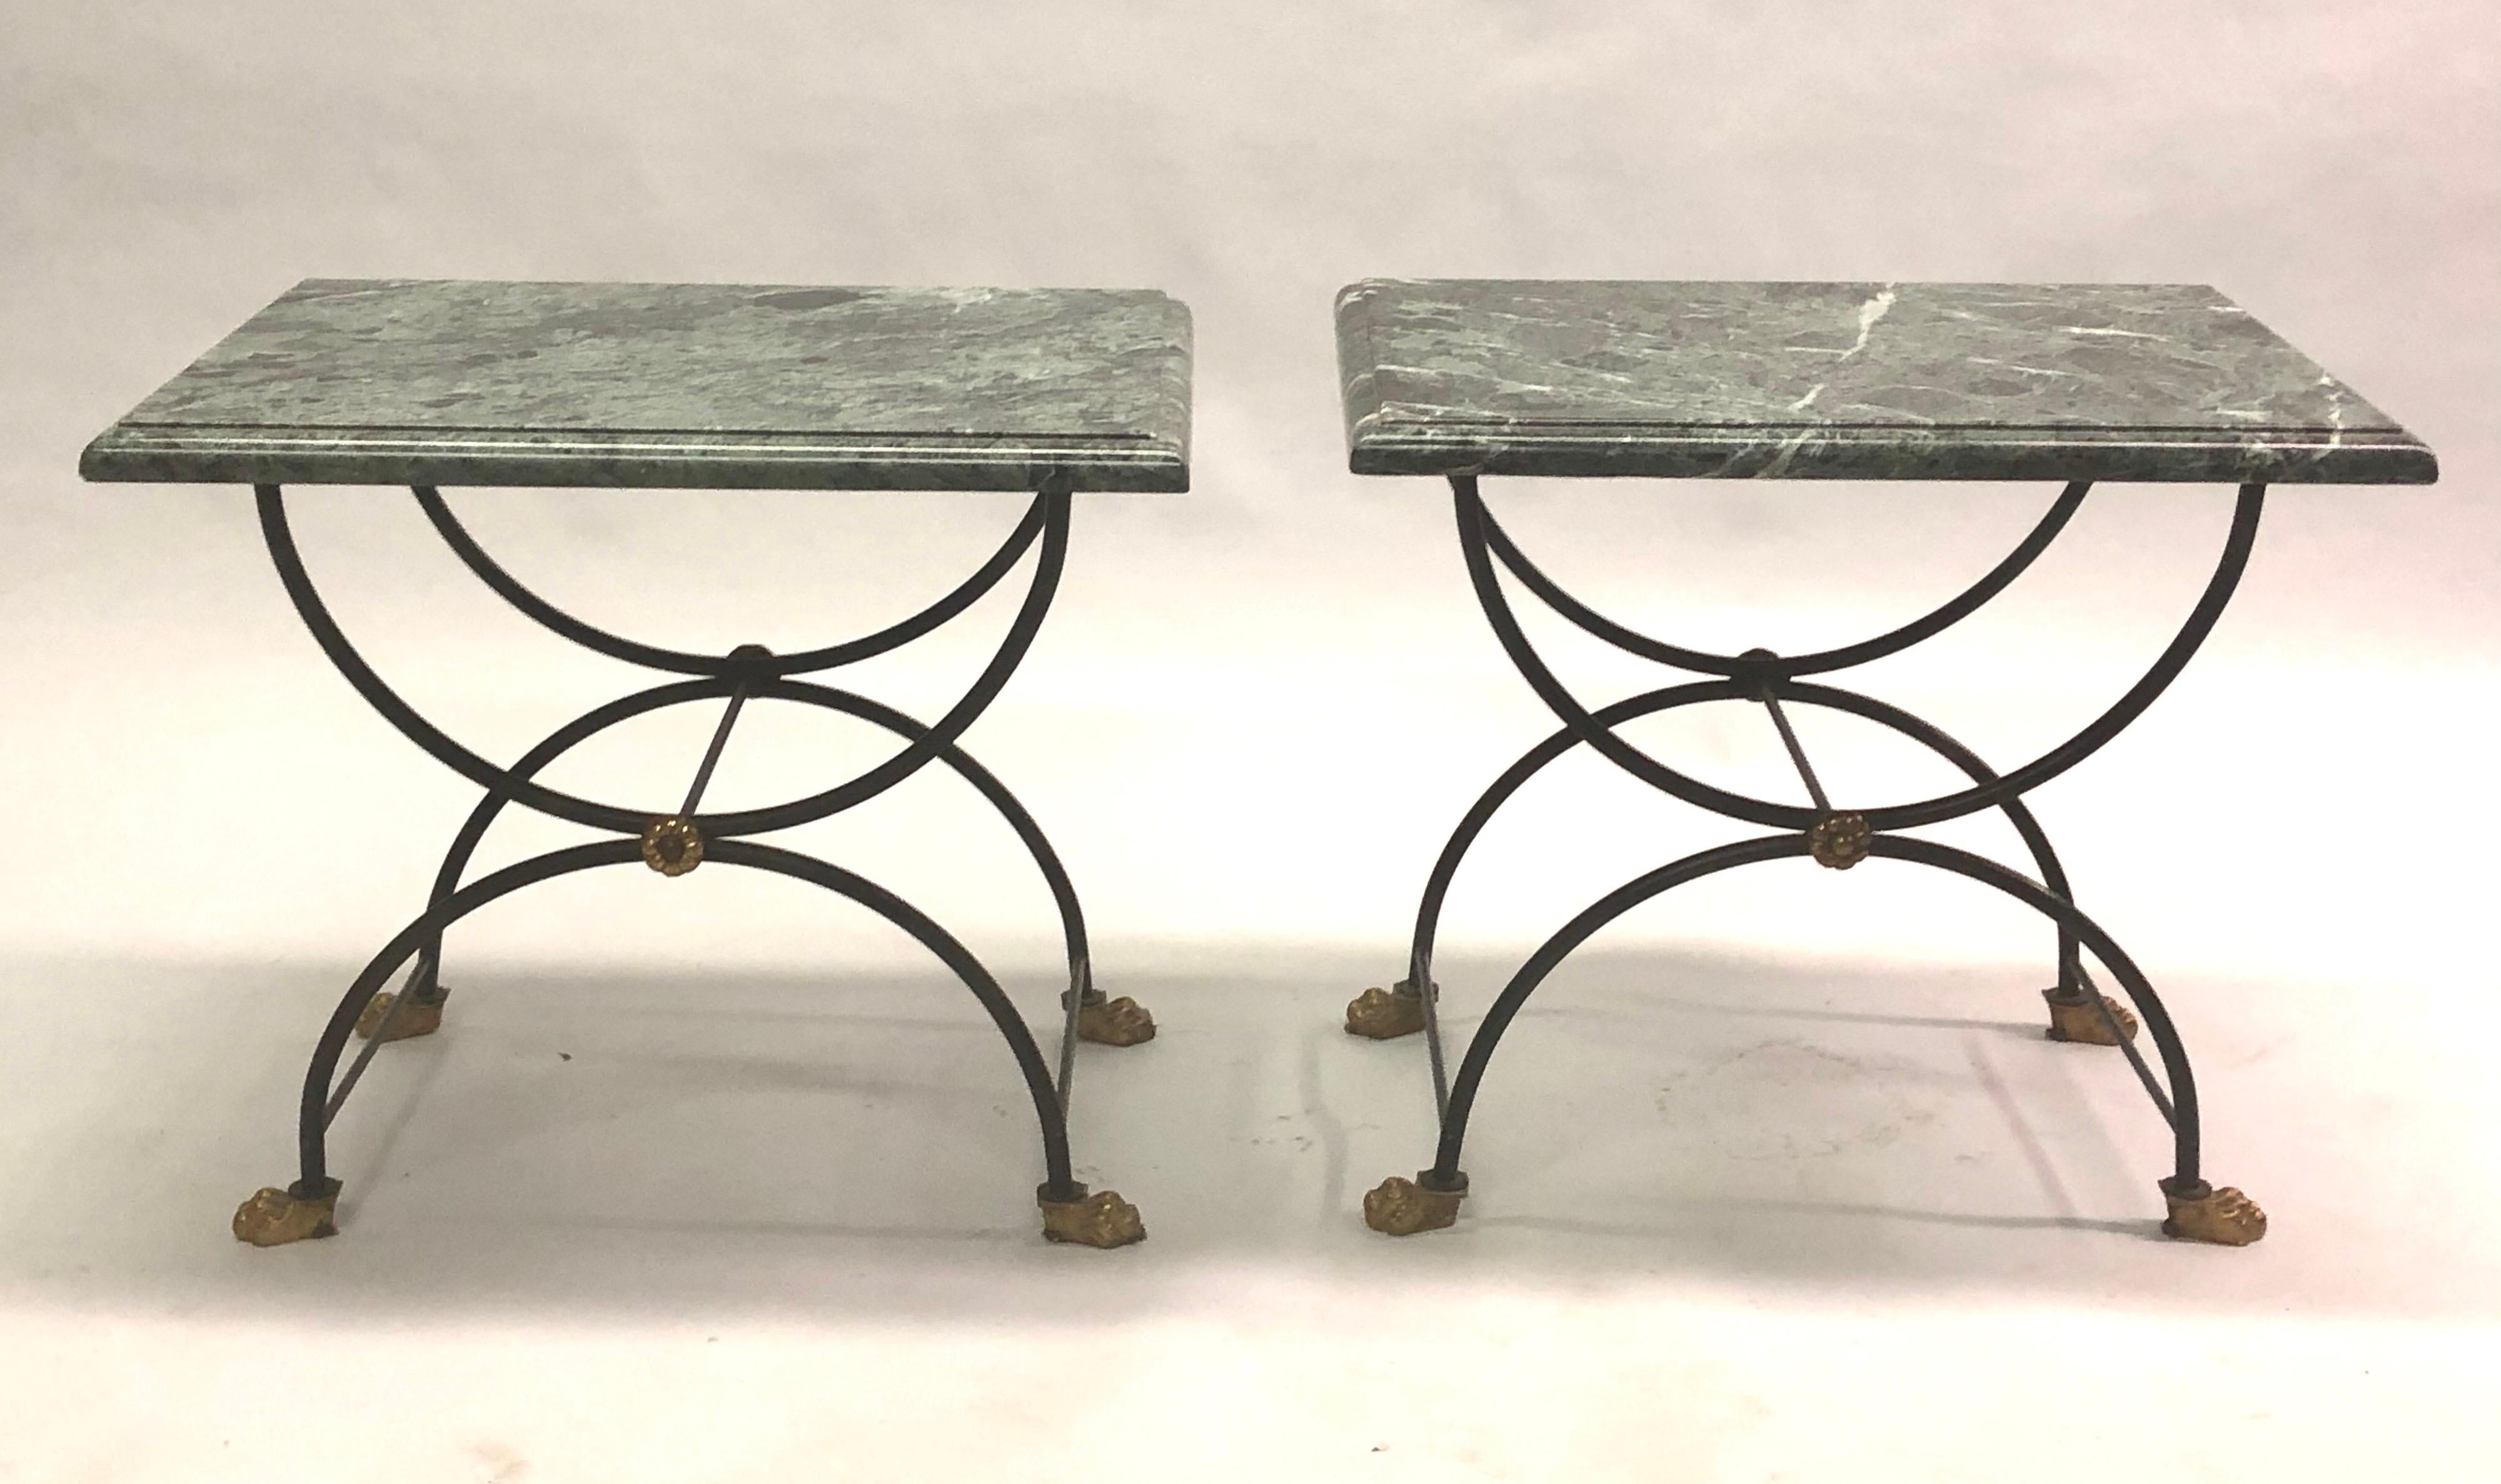 Pair of French Mid-Century Modern neoclassical end or side tables attributed to Jean-Charles Moreux for Maison Jansen. The pieces have a rare, compelling energy as they balance modernity, neoclassicism and surrealist tendencies. The tables feature